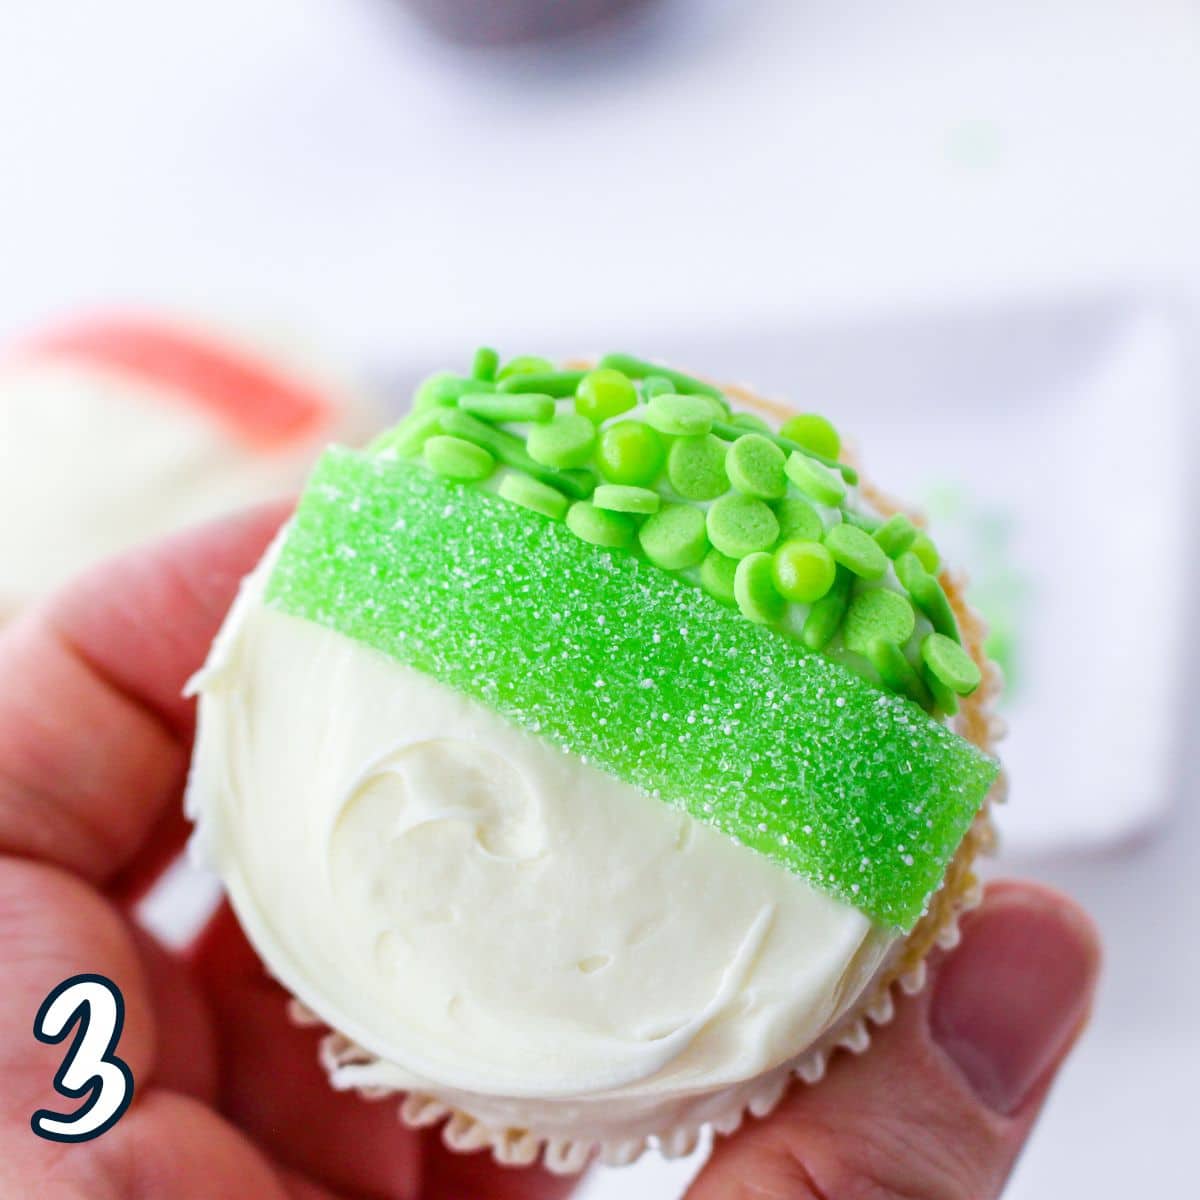 A person holding a cupcake with a green gummy streamer and green sprinkles.